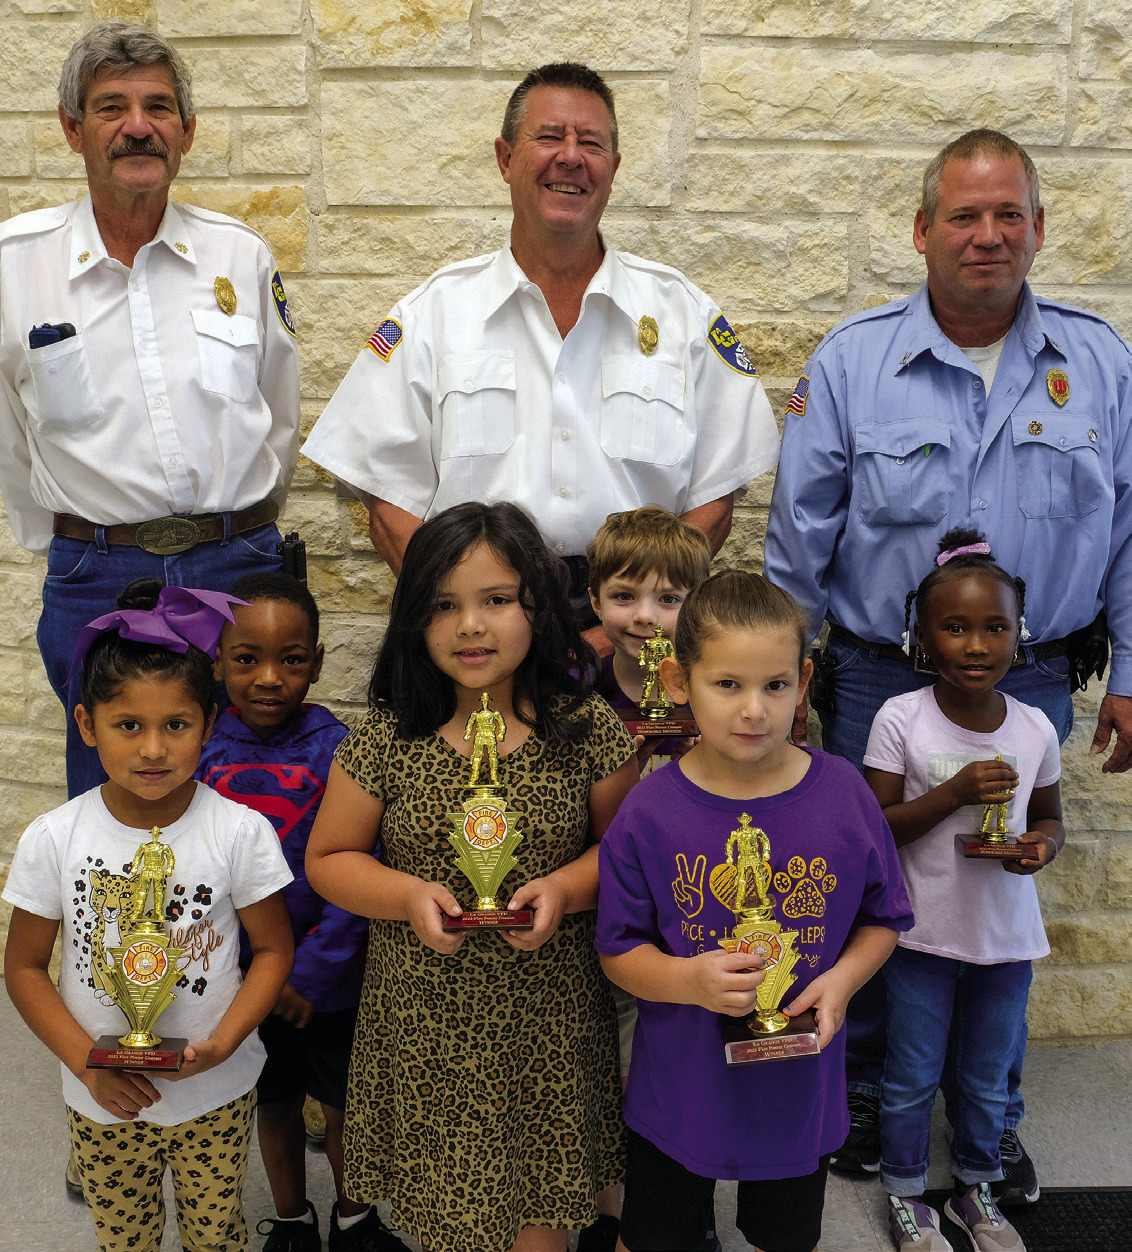 La Grange ISD Sacred Heart Fire Poster Winners The Fayette County Record